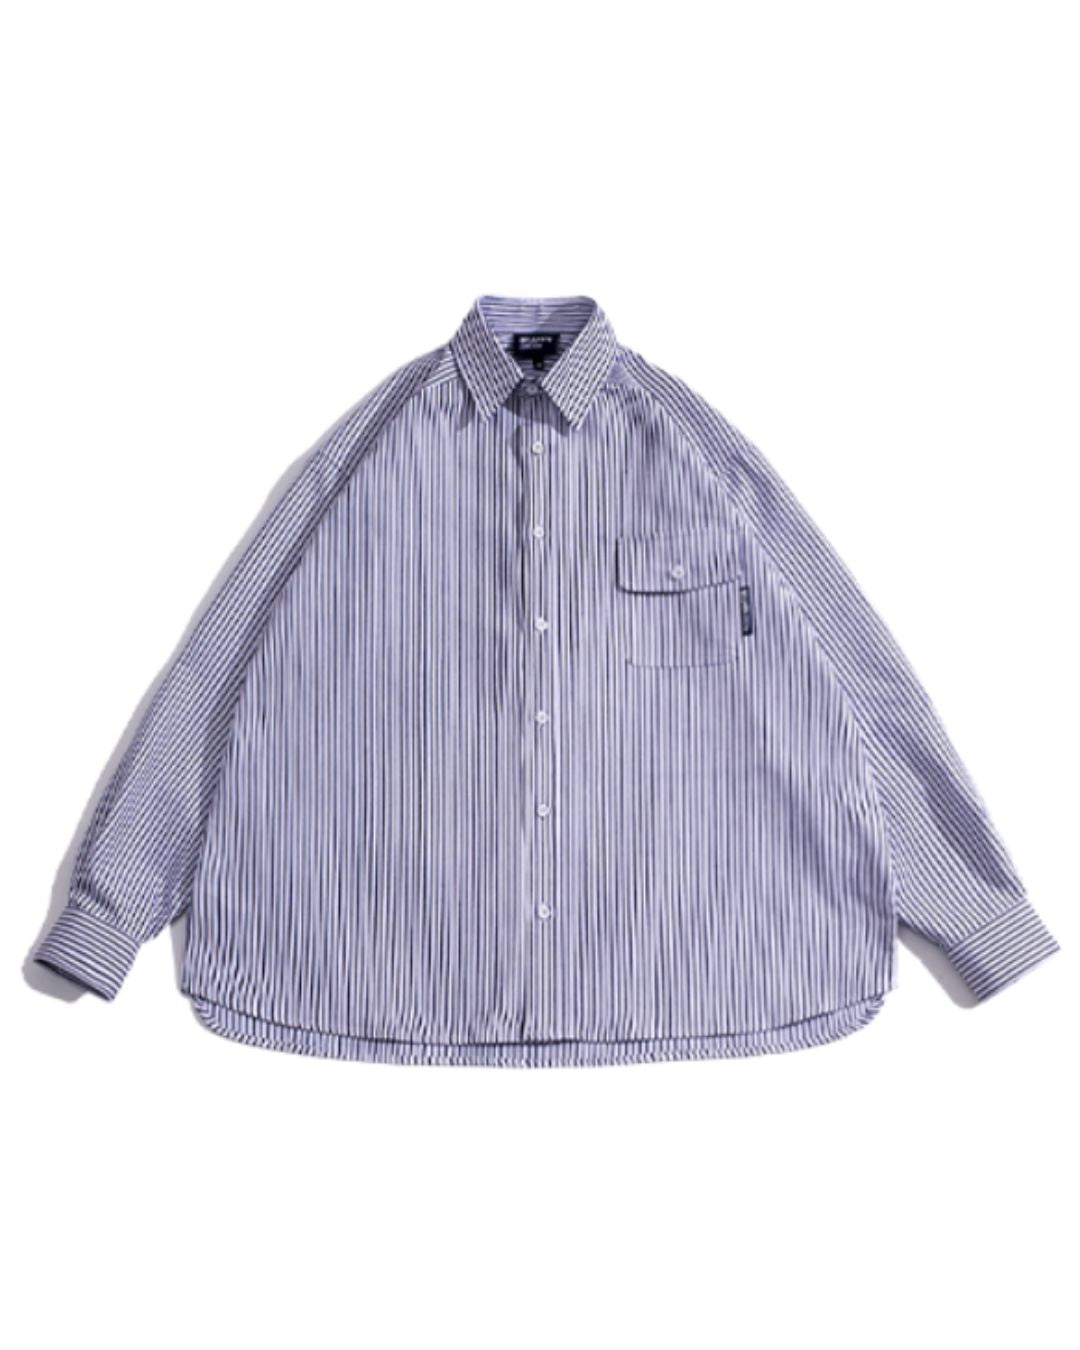 Relaxed Striped Shirt　LS035